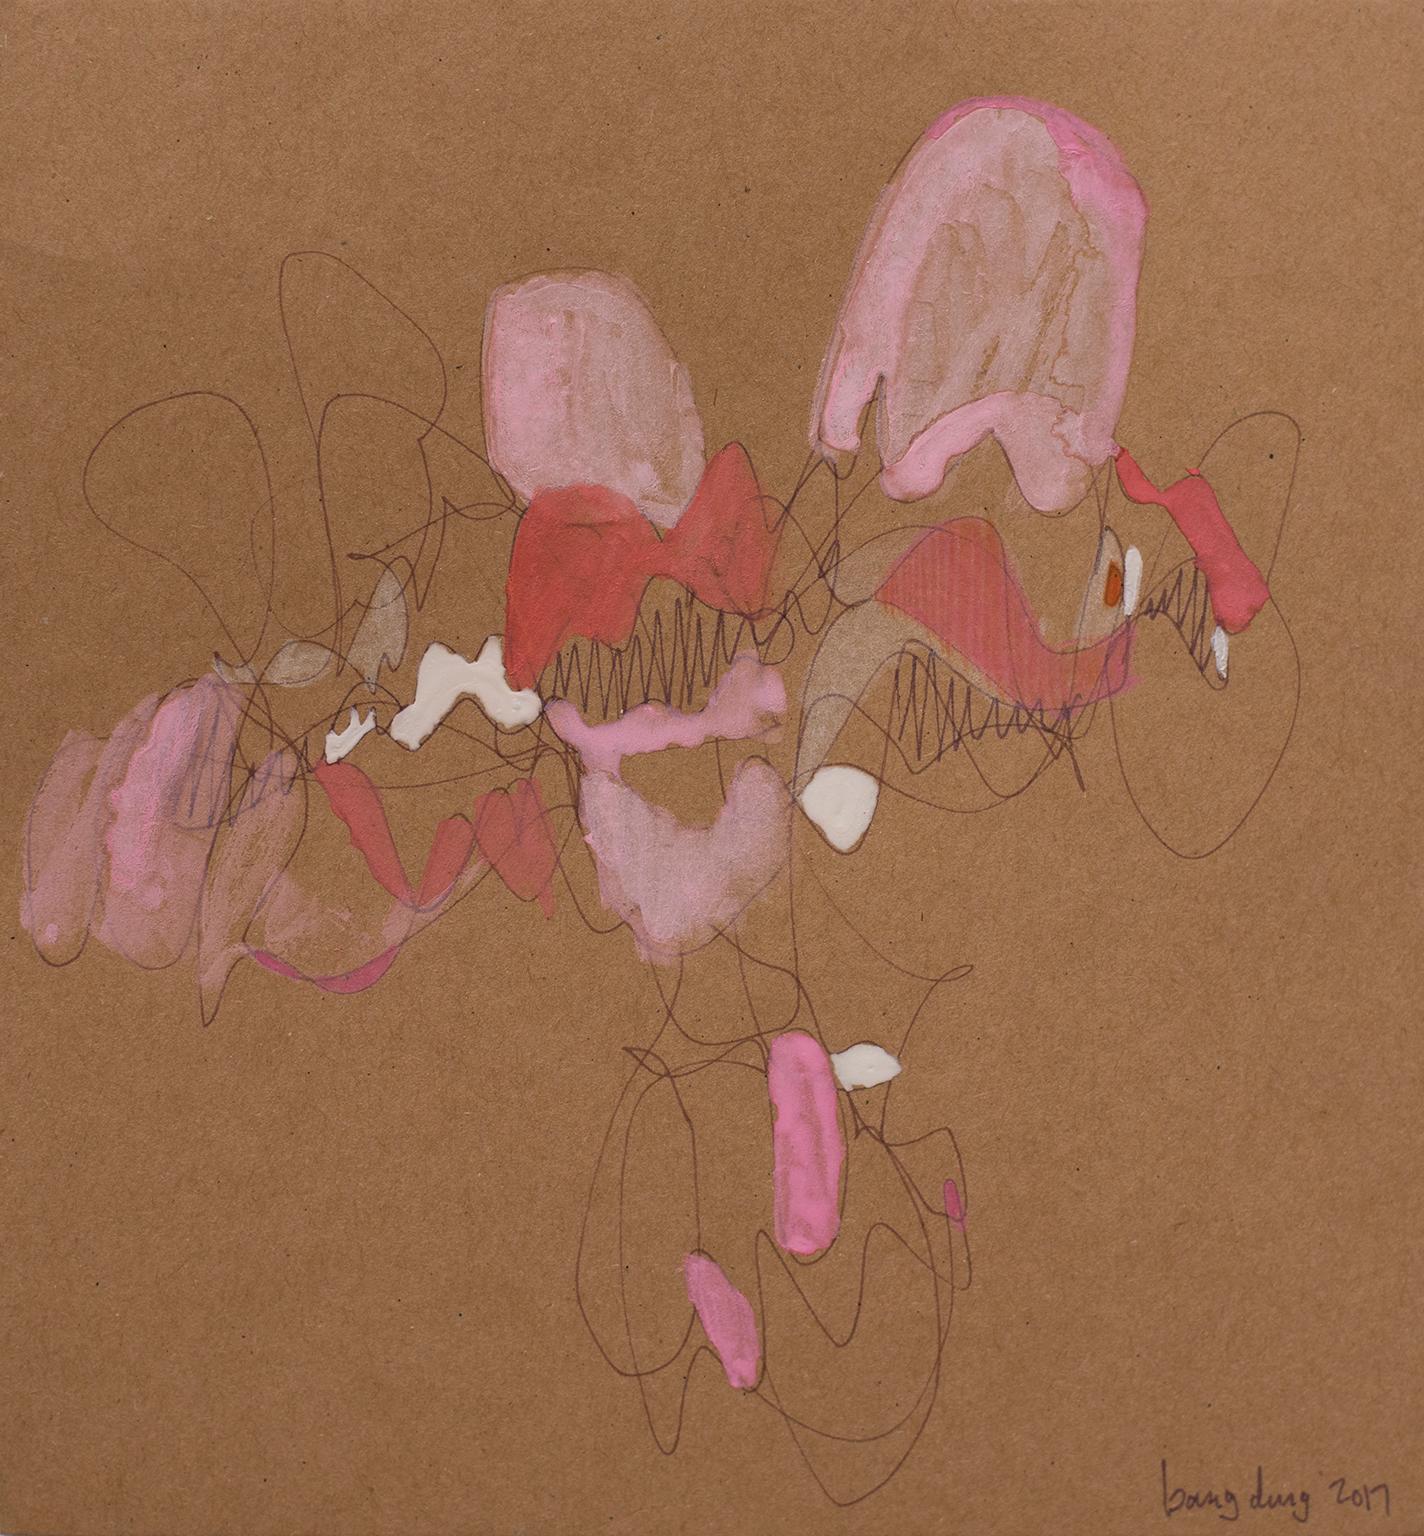 Filling the Brown - Square 16, Pink Transparent by Bang Dang
6 x 6 in
Watercolor, ink, color pencils and markers on brown paper.

Bang Dang's work is a form of meditation apart from his work as an architect. It features intricate line work offset by